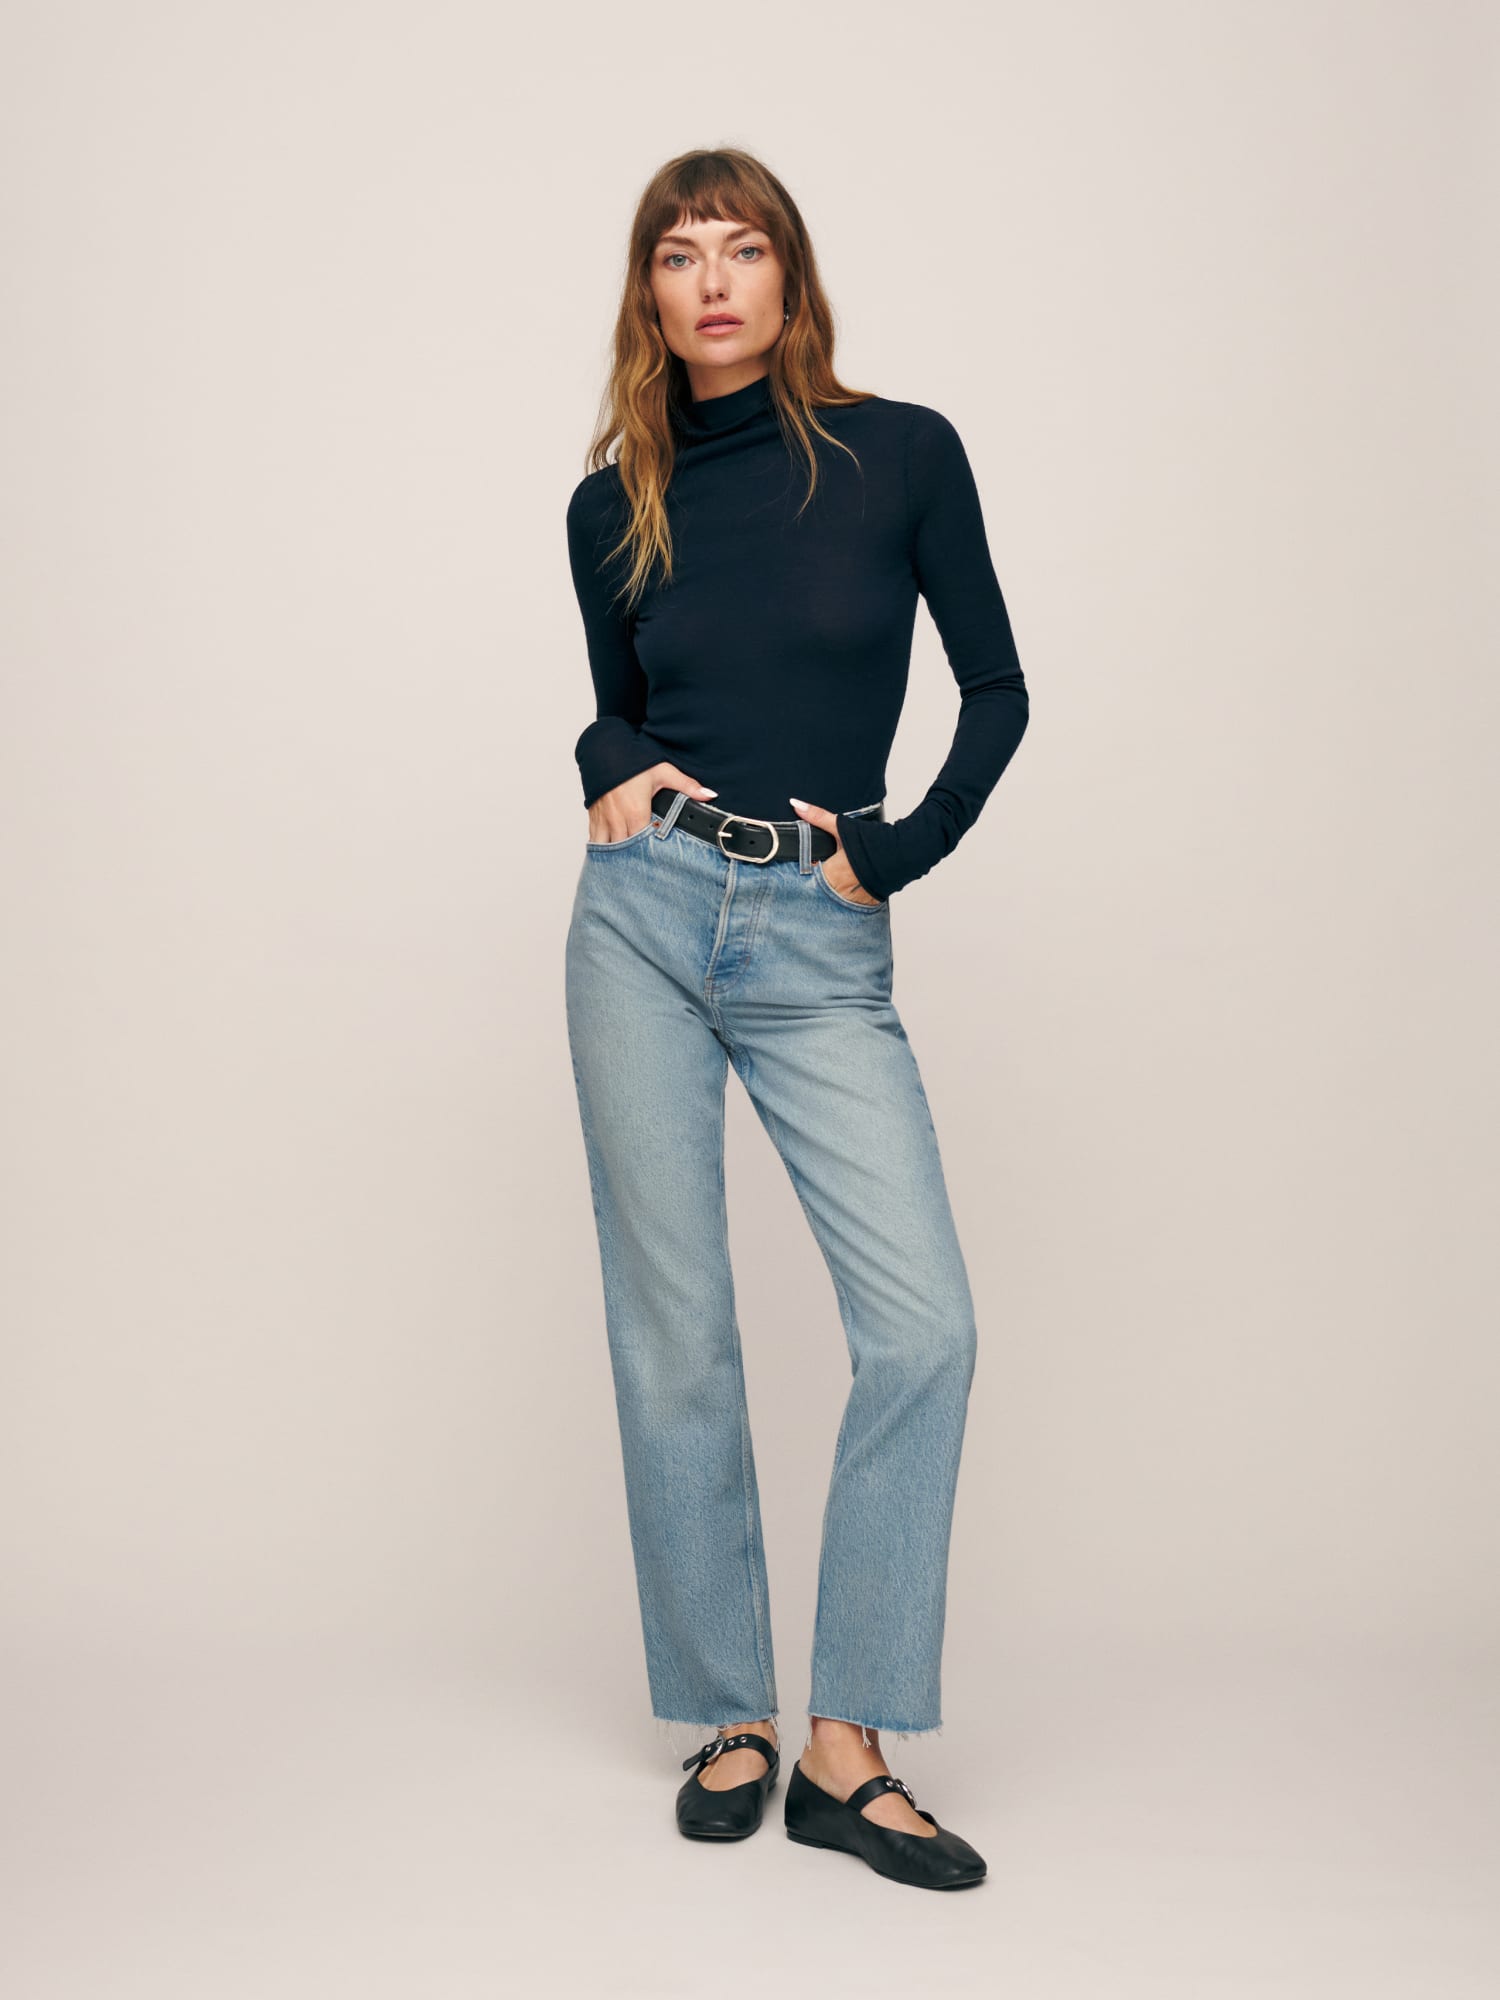 Jeans for Women, produced more sustainably